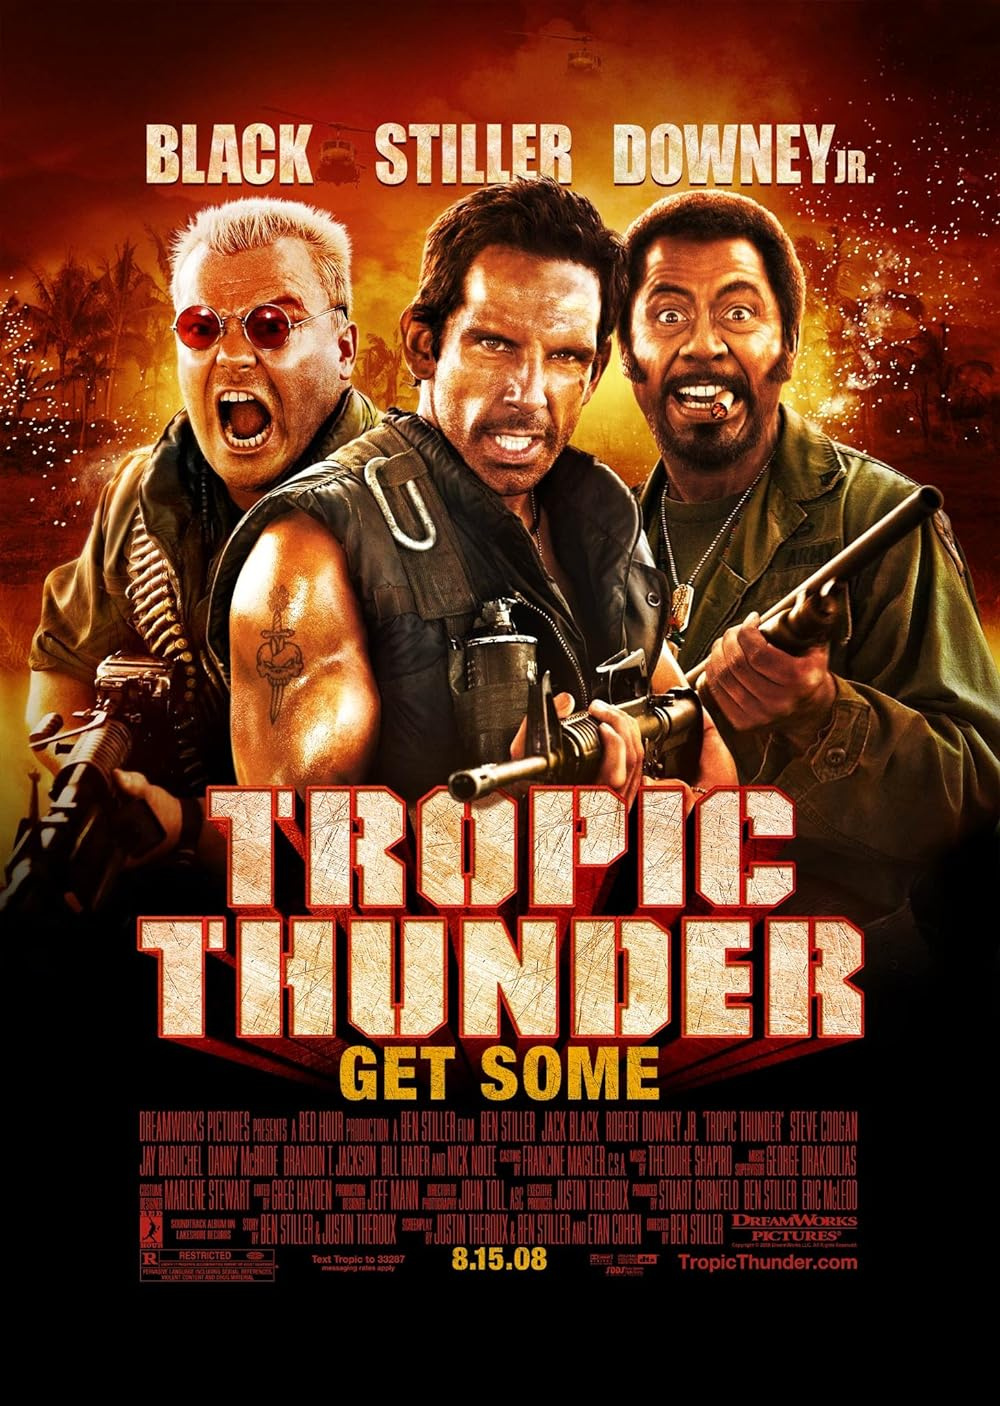 tropic of thunder action comedy movies